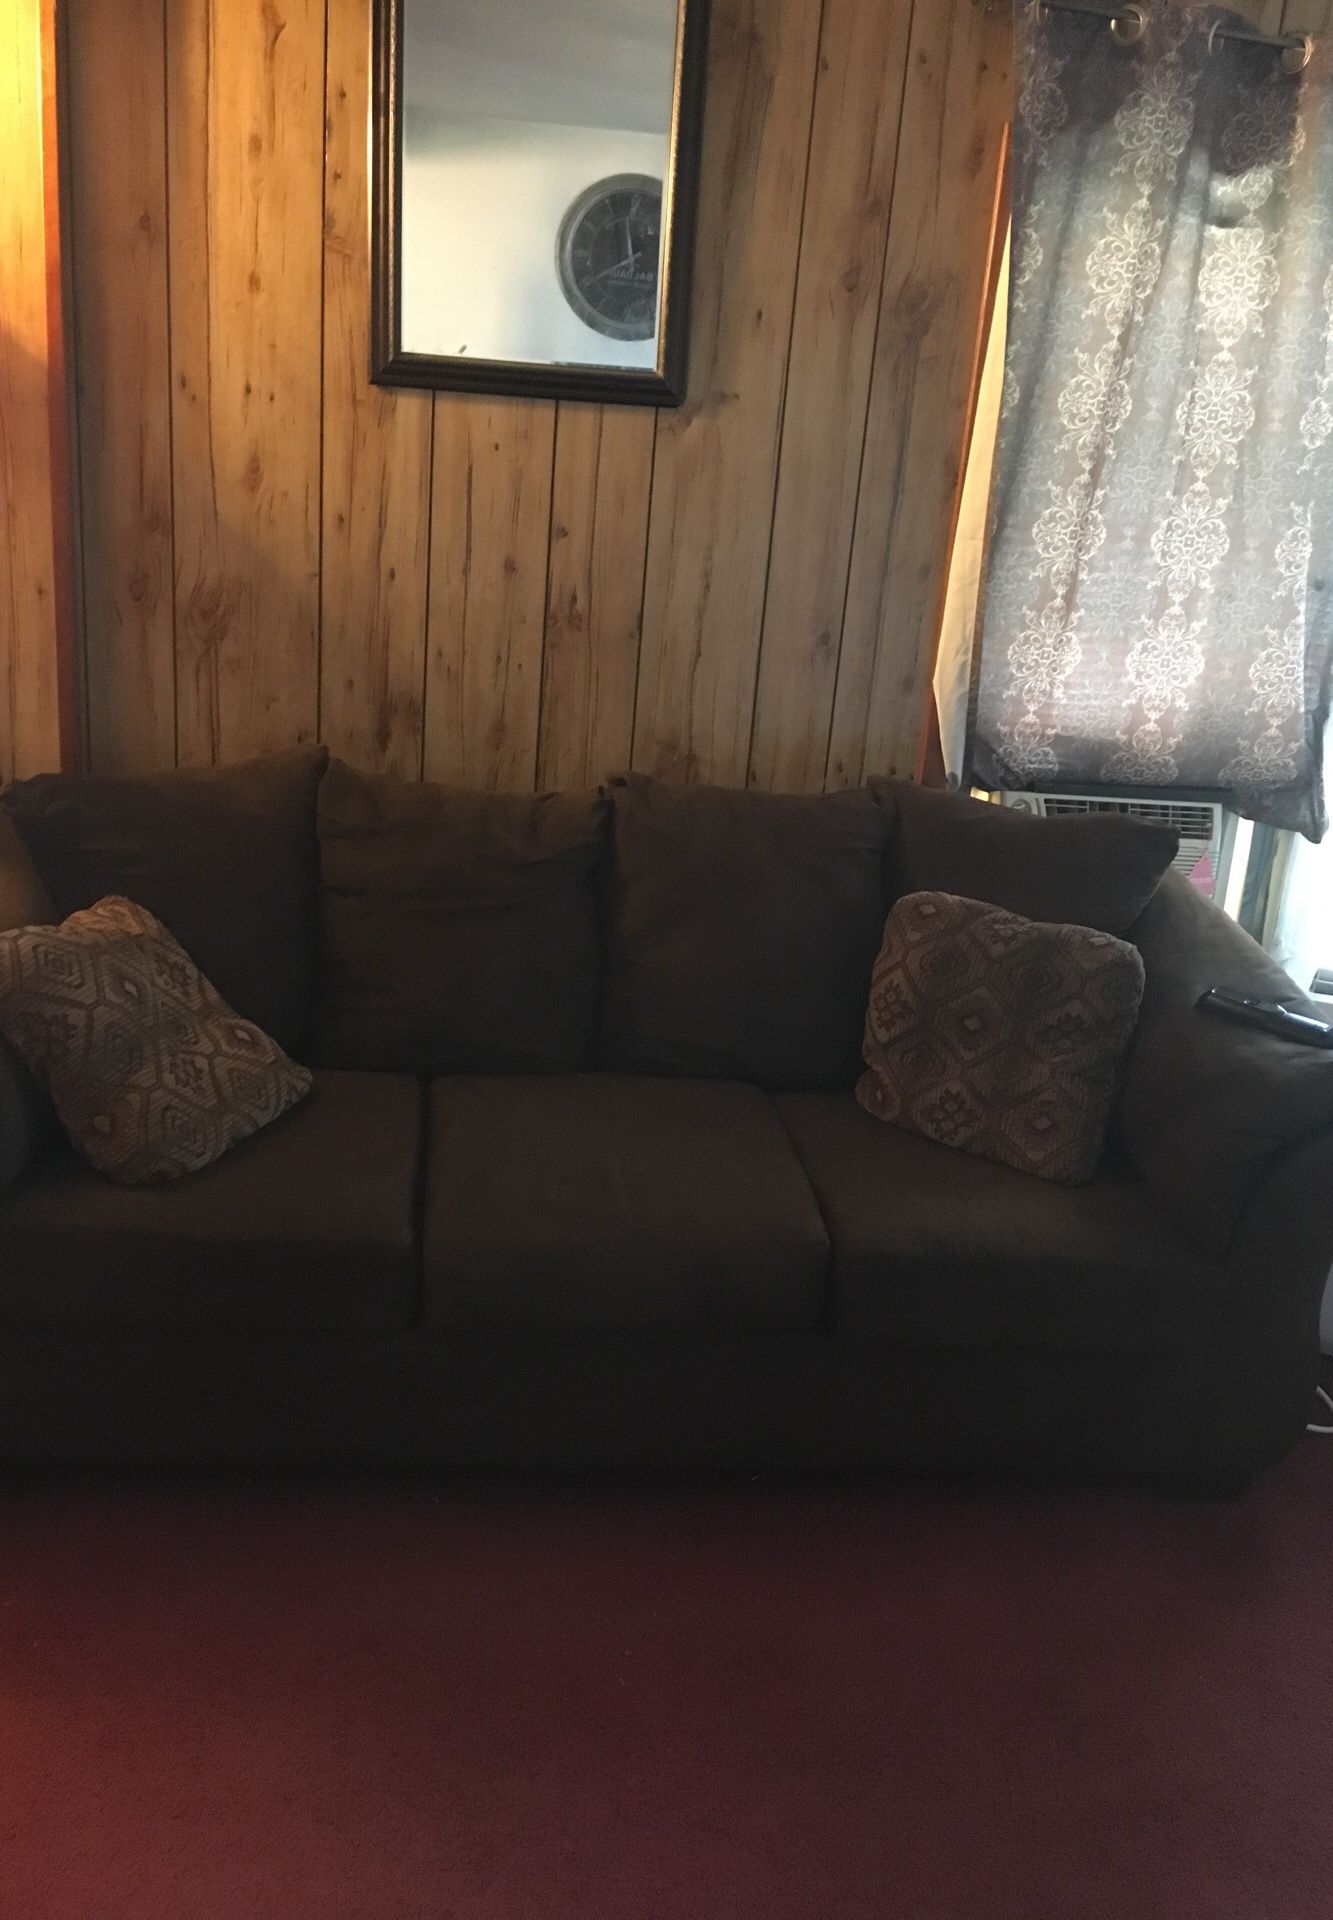 Sofa express couch and loveseat it is a brown color very well taken care of it’s about two years old no stains on it the pillows are all fluffy